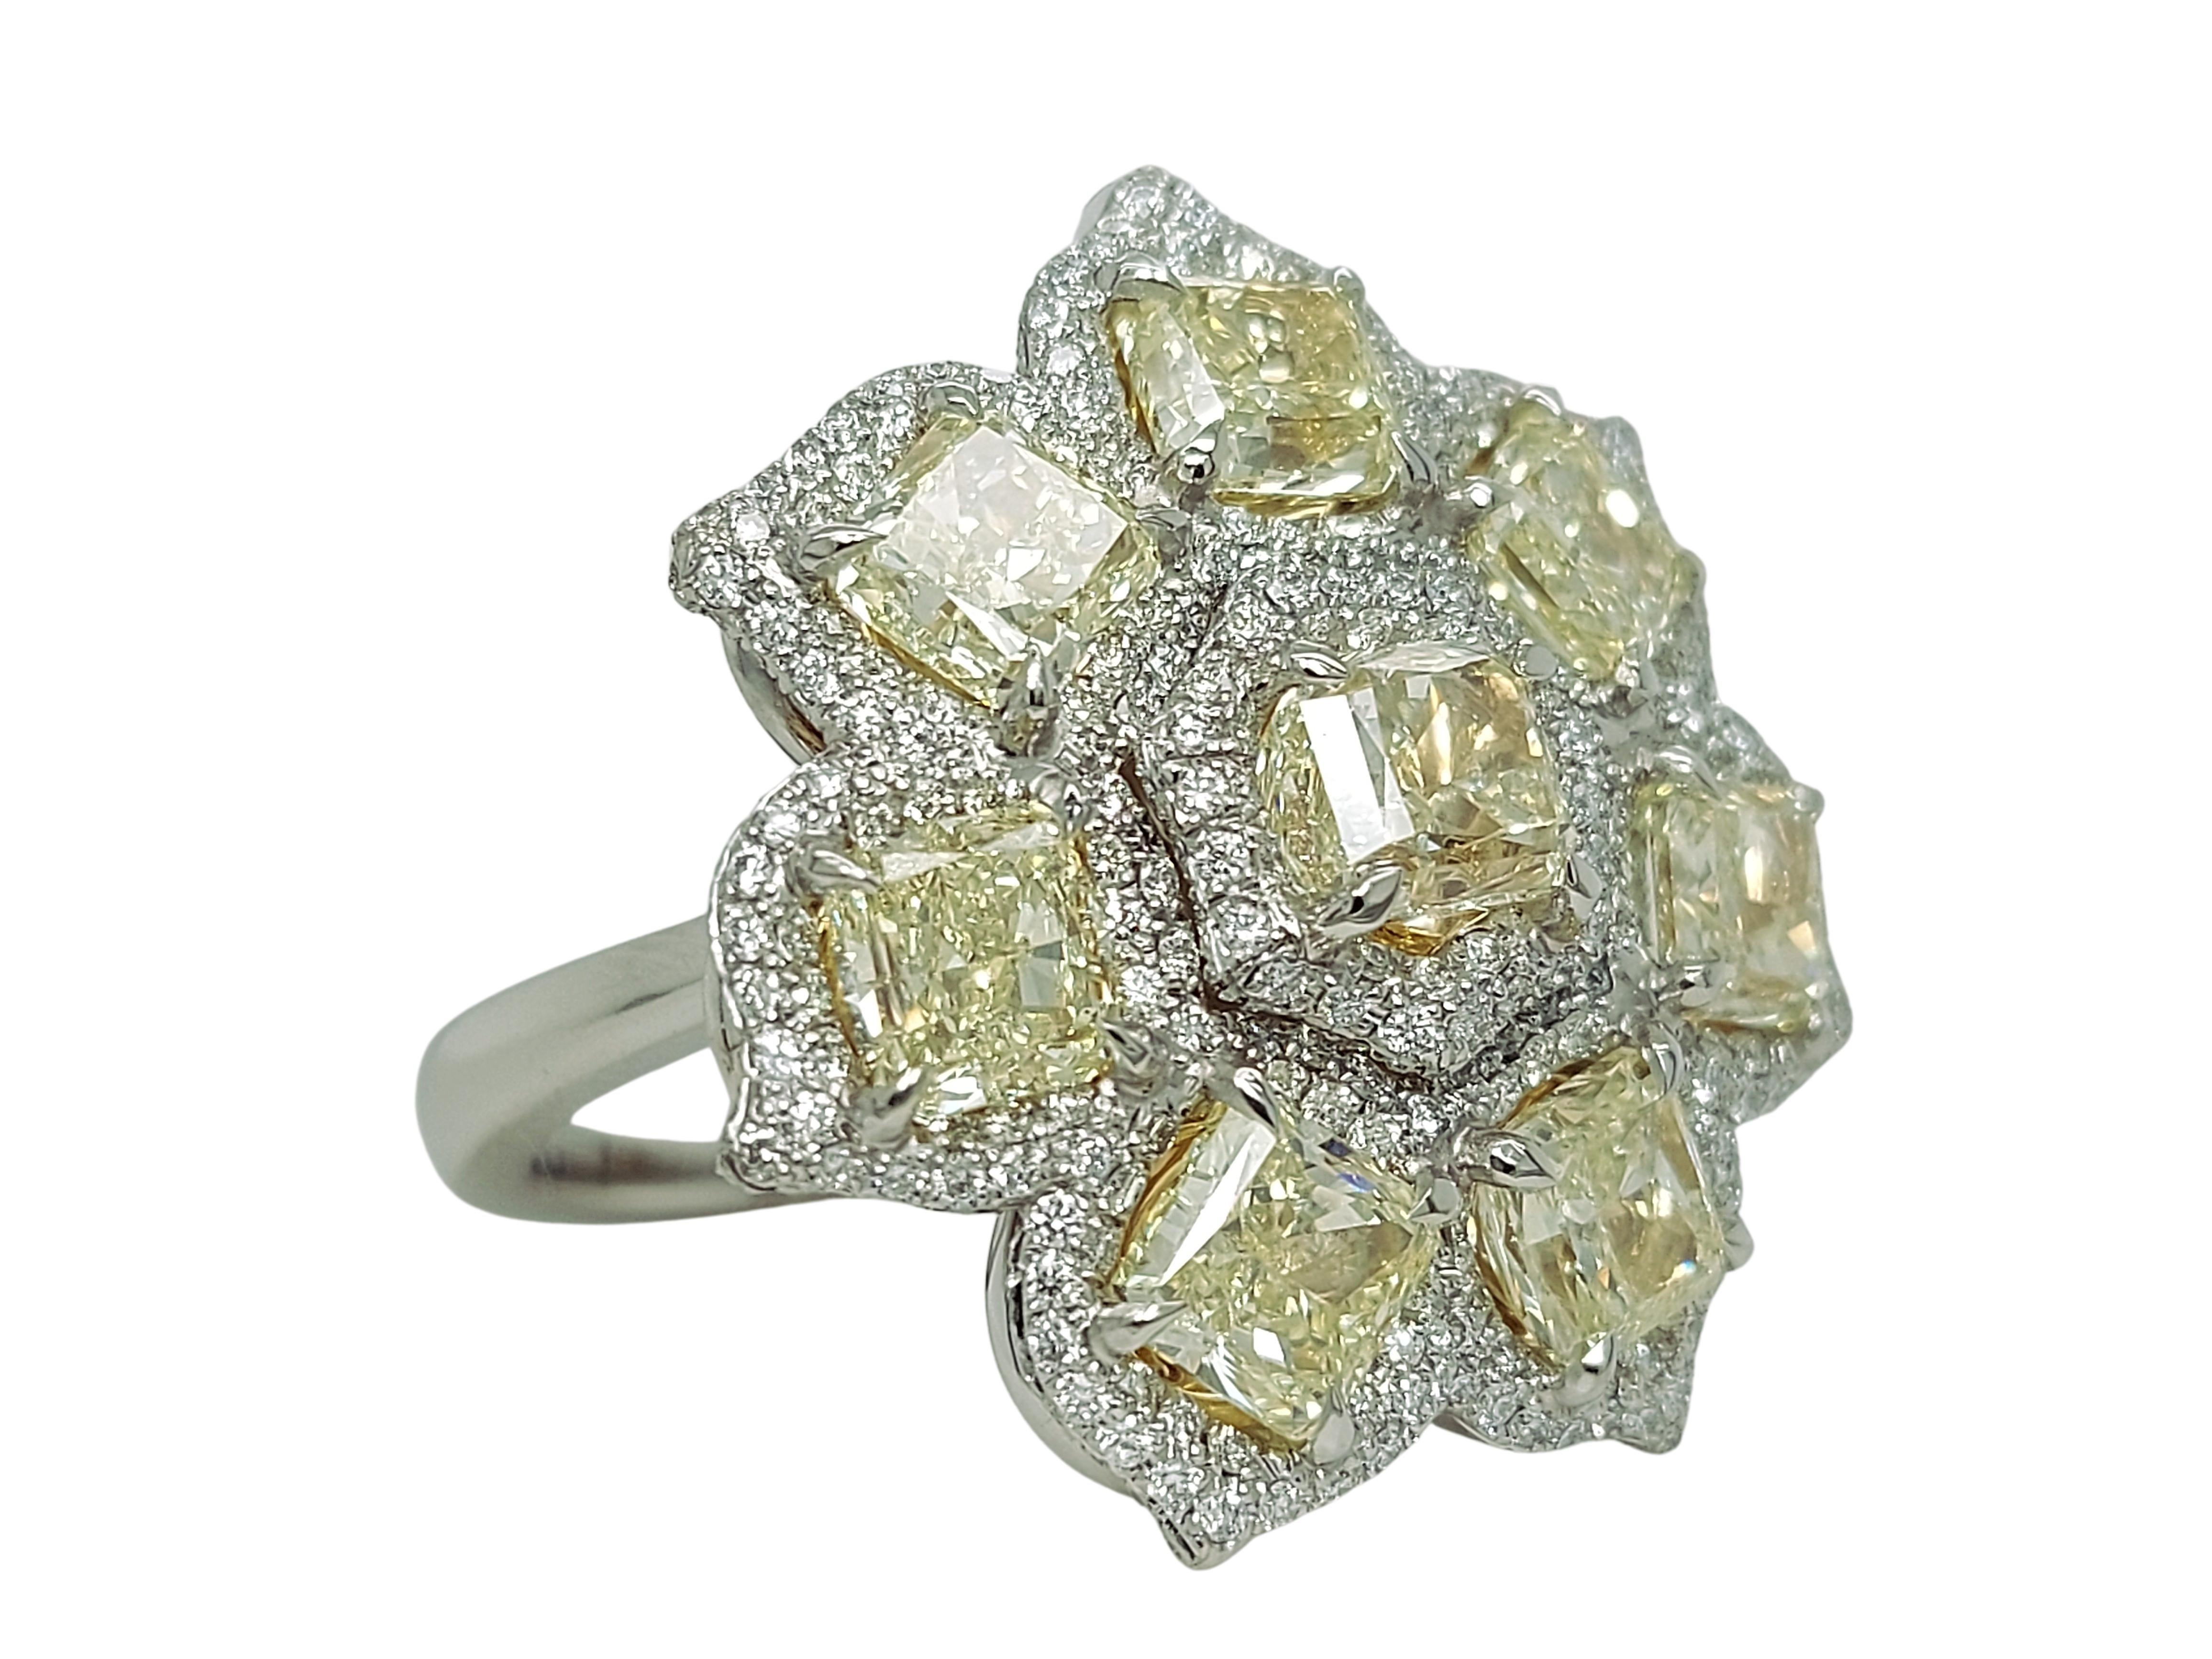 Platinum & 18 kt Pink Gold, 8.49 Ct Fancy Yellow Diamonds & 1.74 Ct Ring

Amazing One of a kind handcrafted High Jewellery Ring.

8.49 fancy yellow diamonds
1.74 ct 400 smaal Brilliant Cut diamonds 
platinum and pink gold